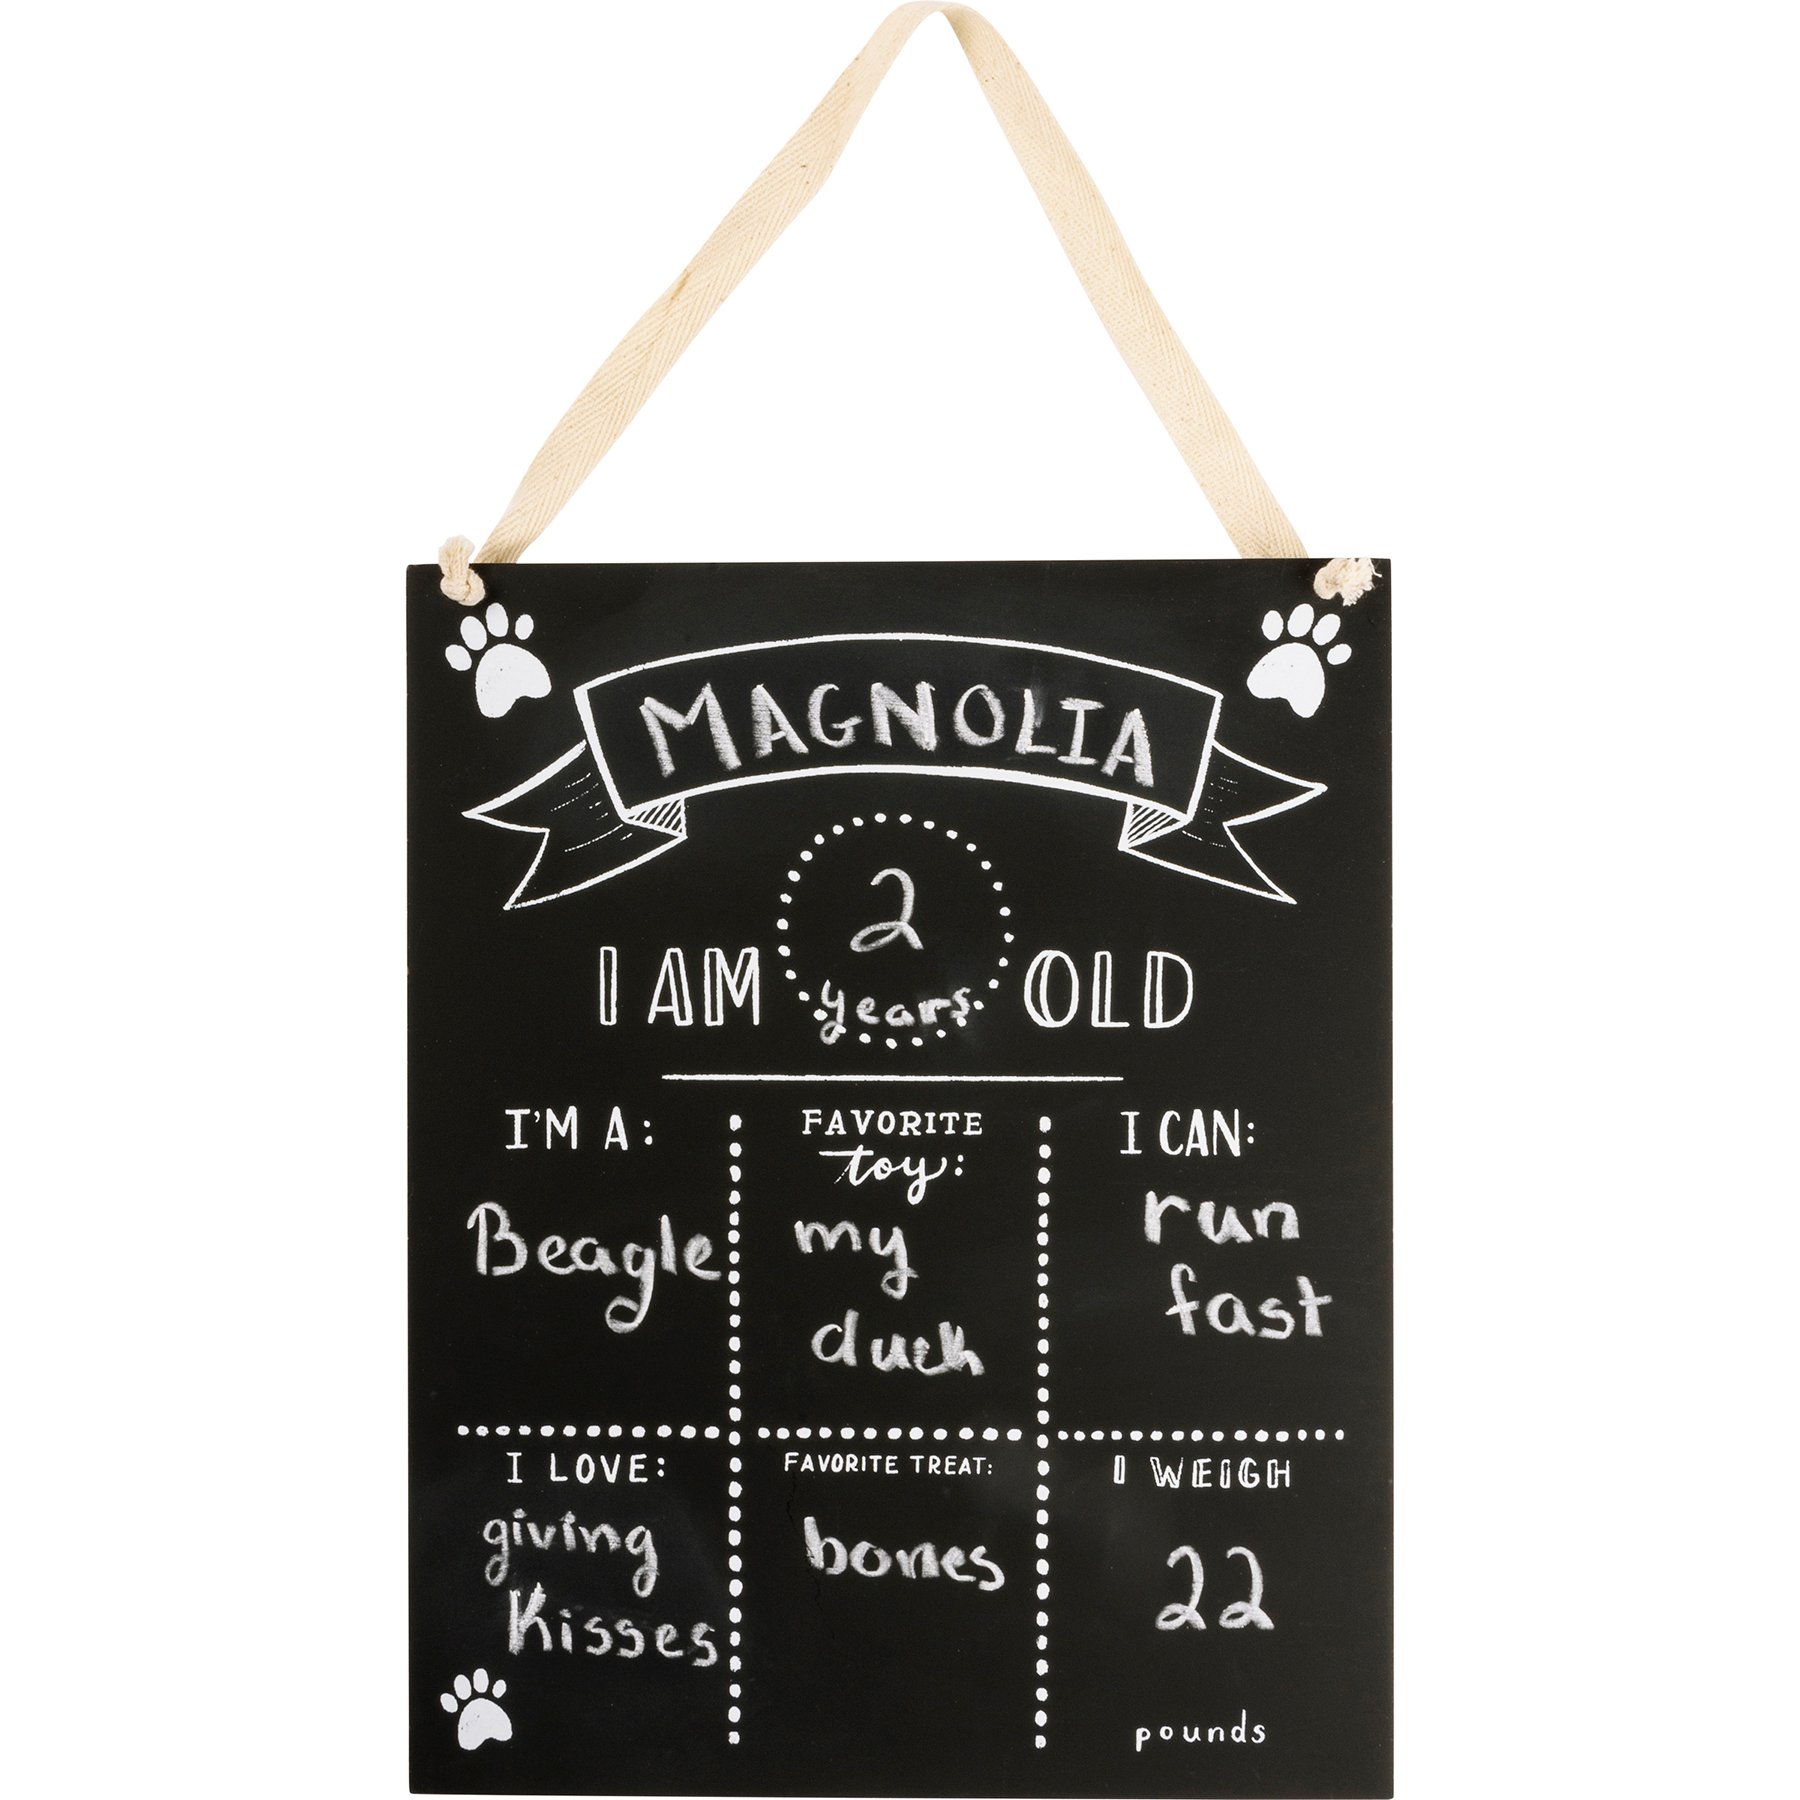 9 by 12 Inches 3 Pastel Markers Cohas Birthday Milestone Board for Dogs with Party Theme and Reusable Chalkboard Style Surface